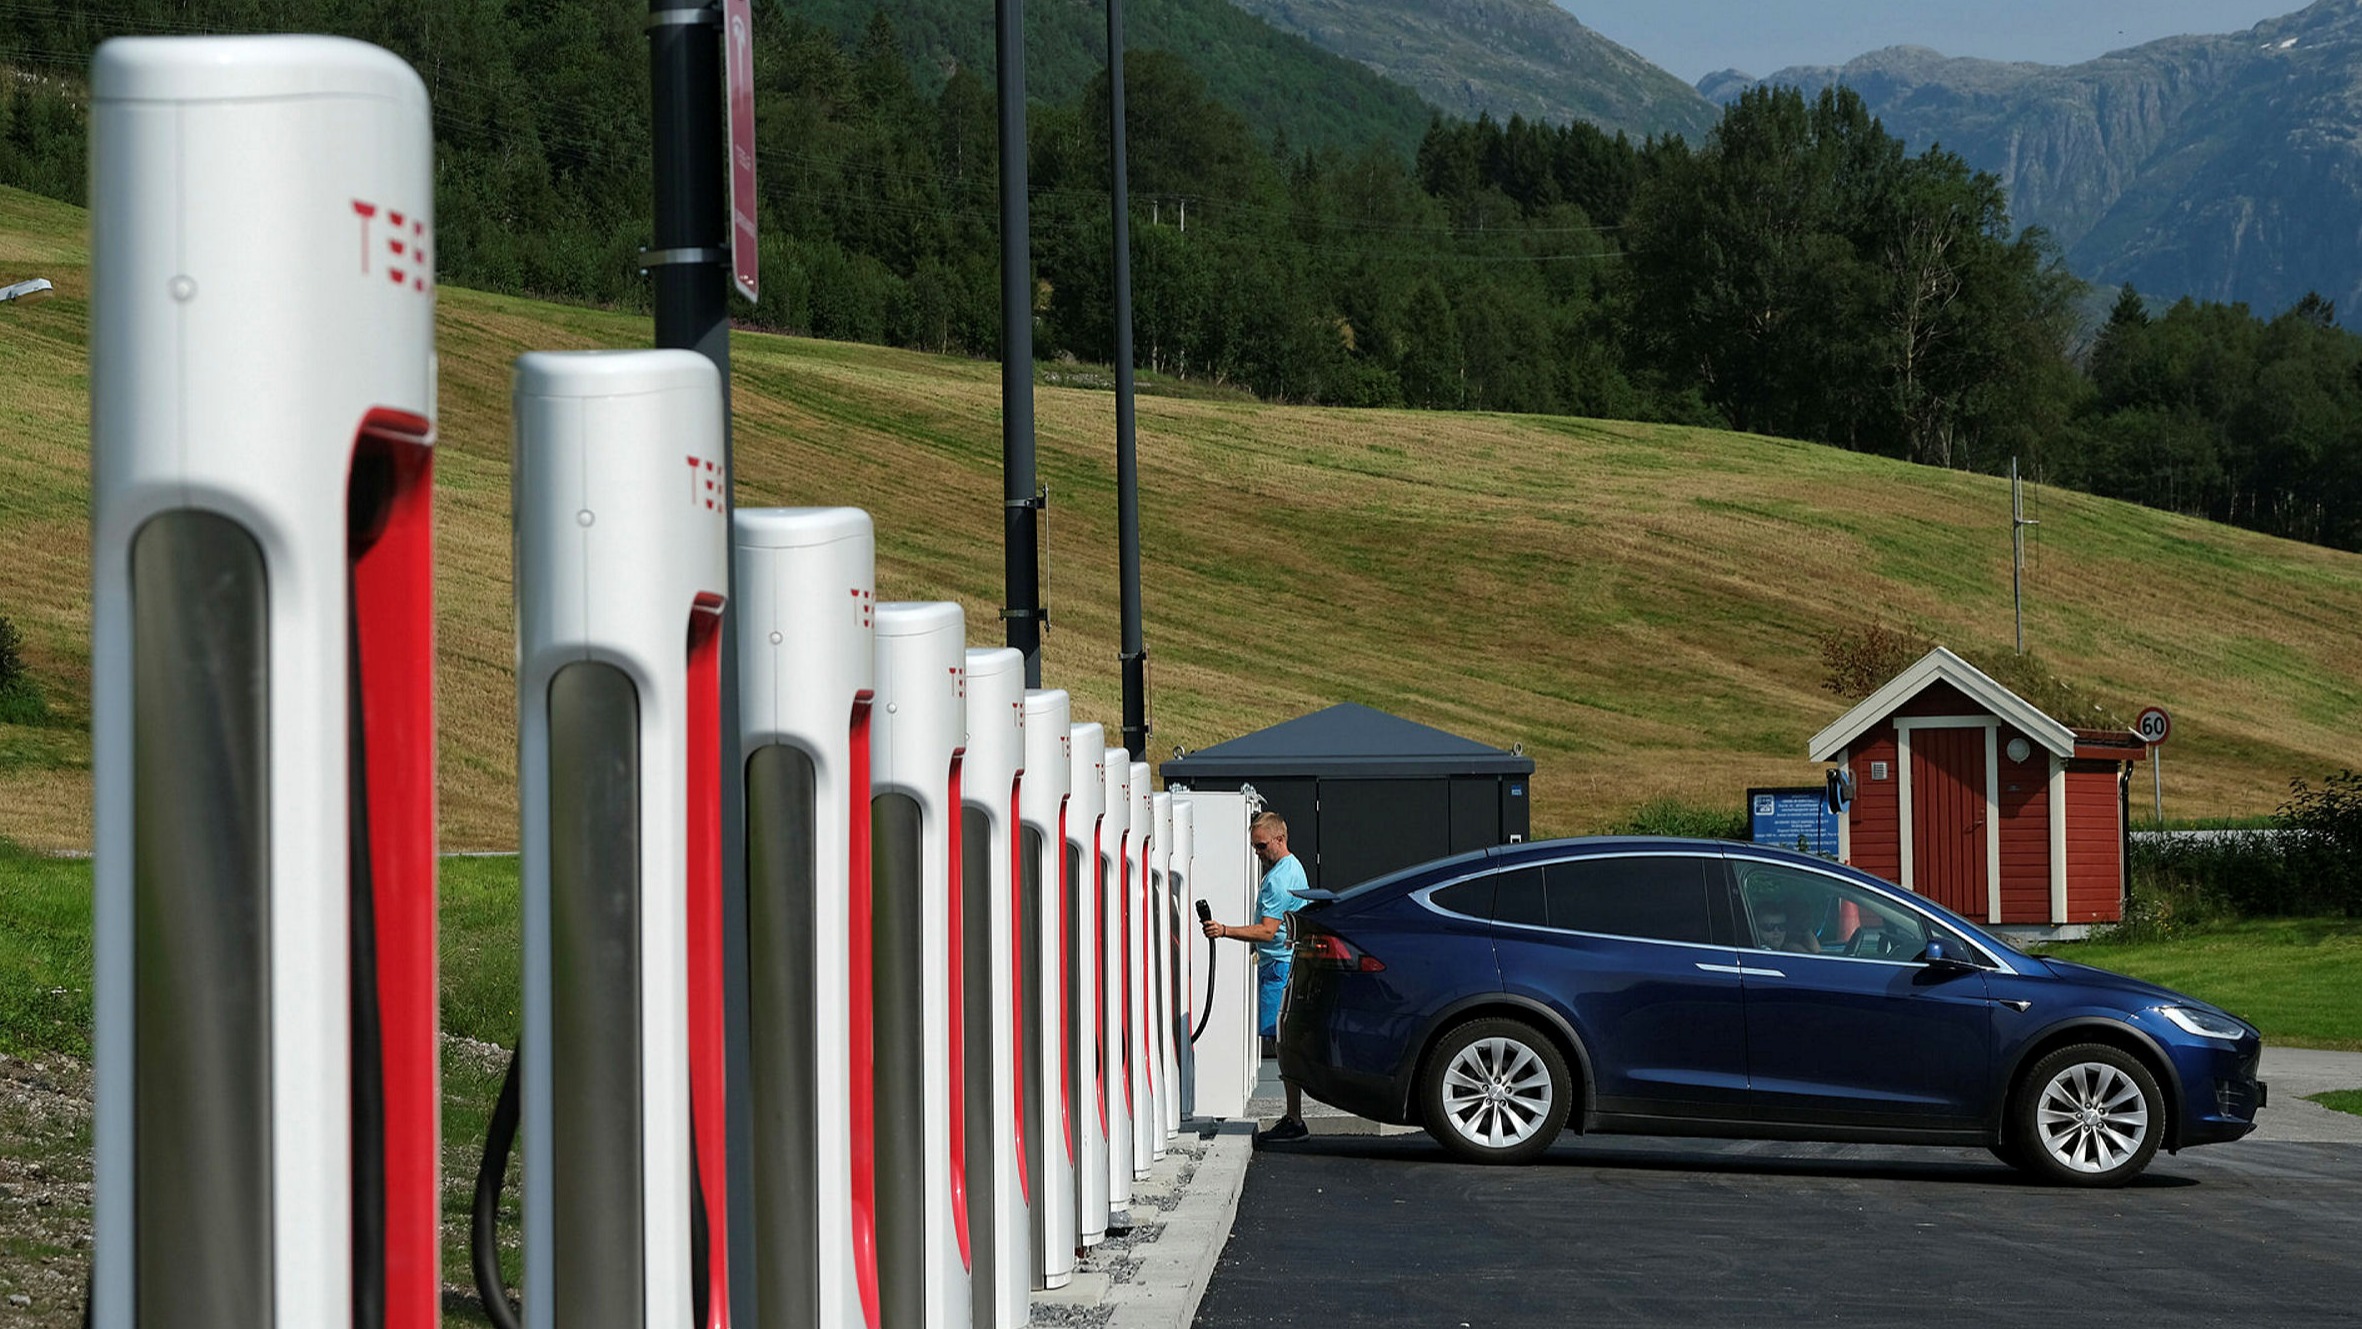 Norway is running out of gas-guzzling cars to tax